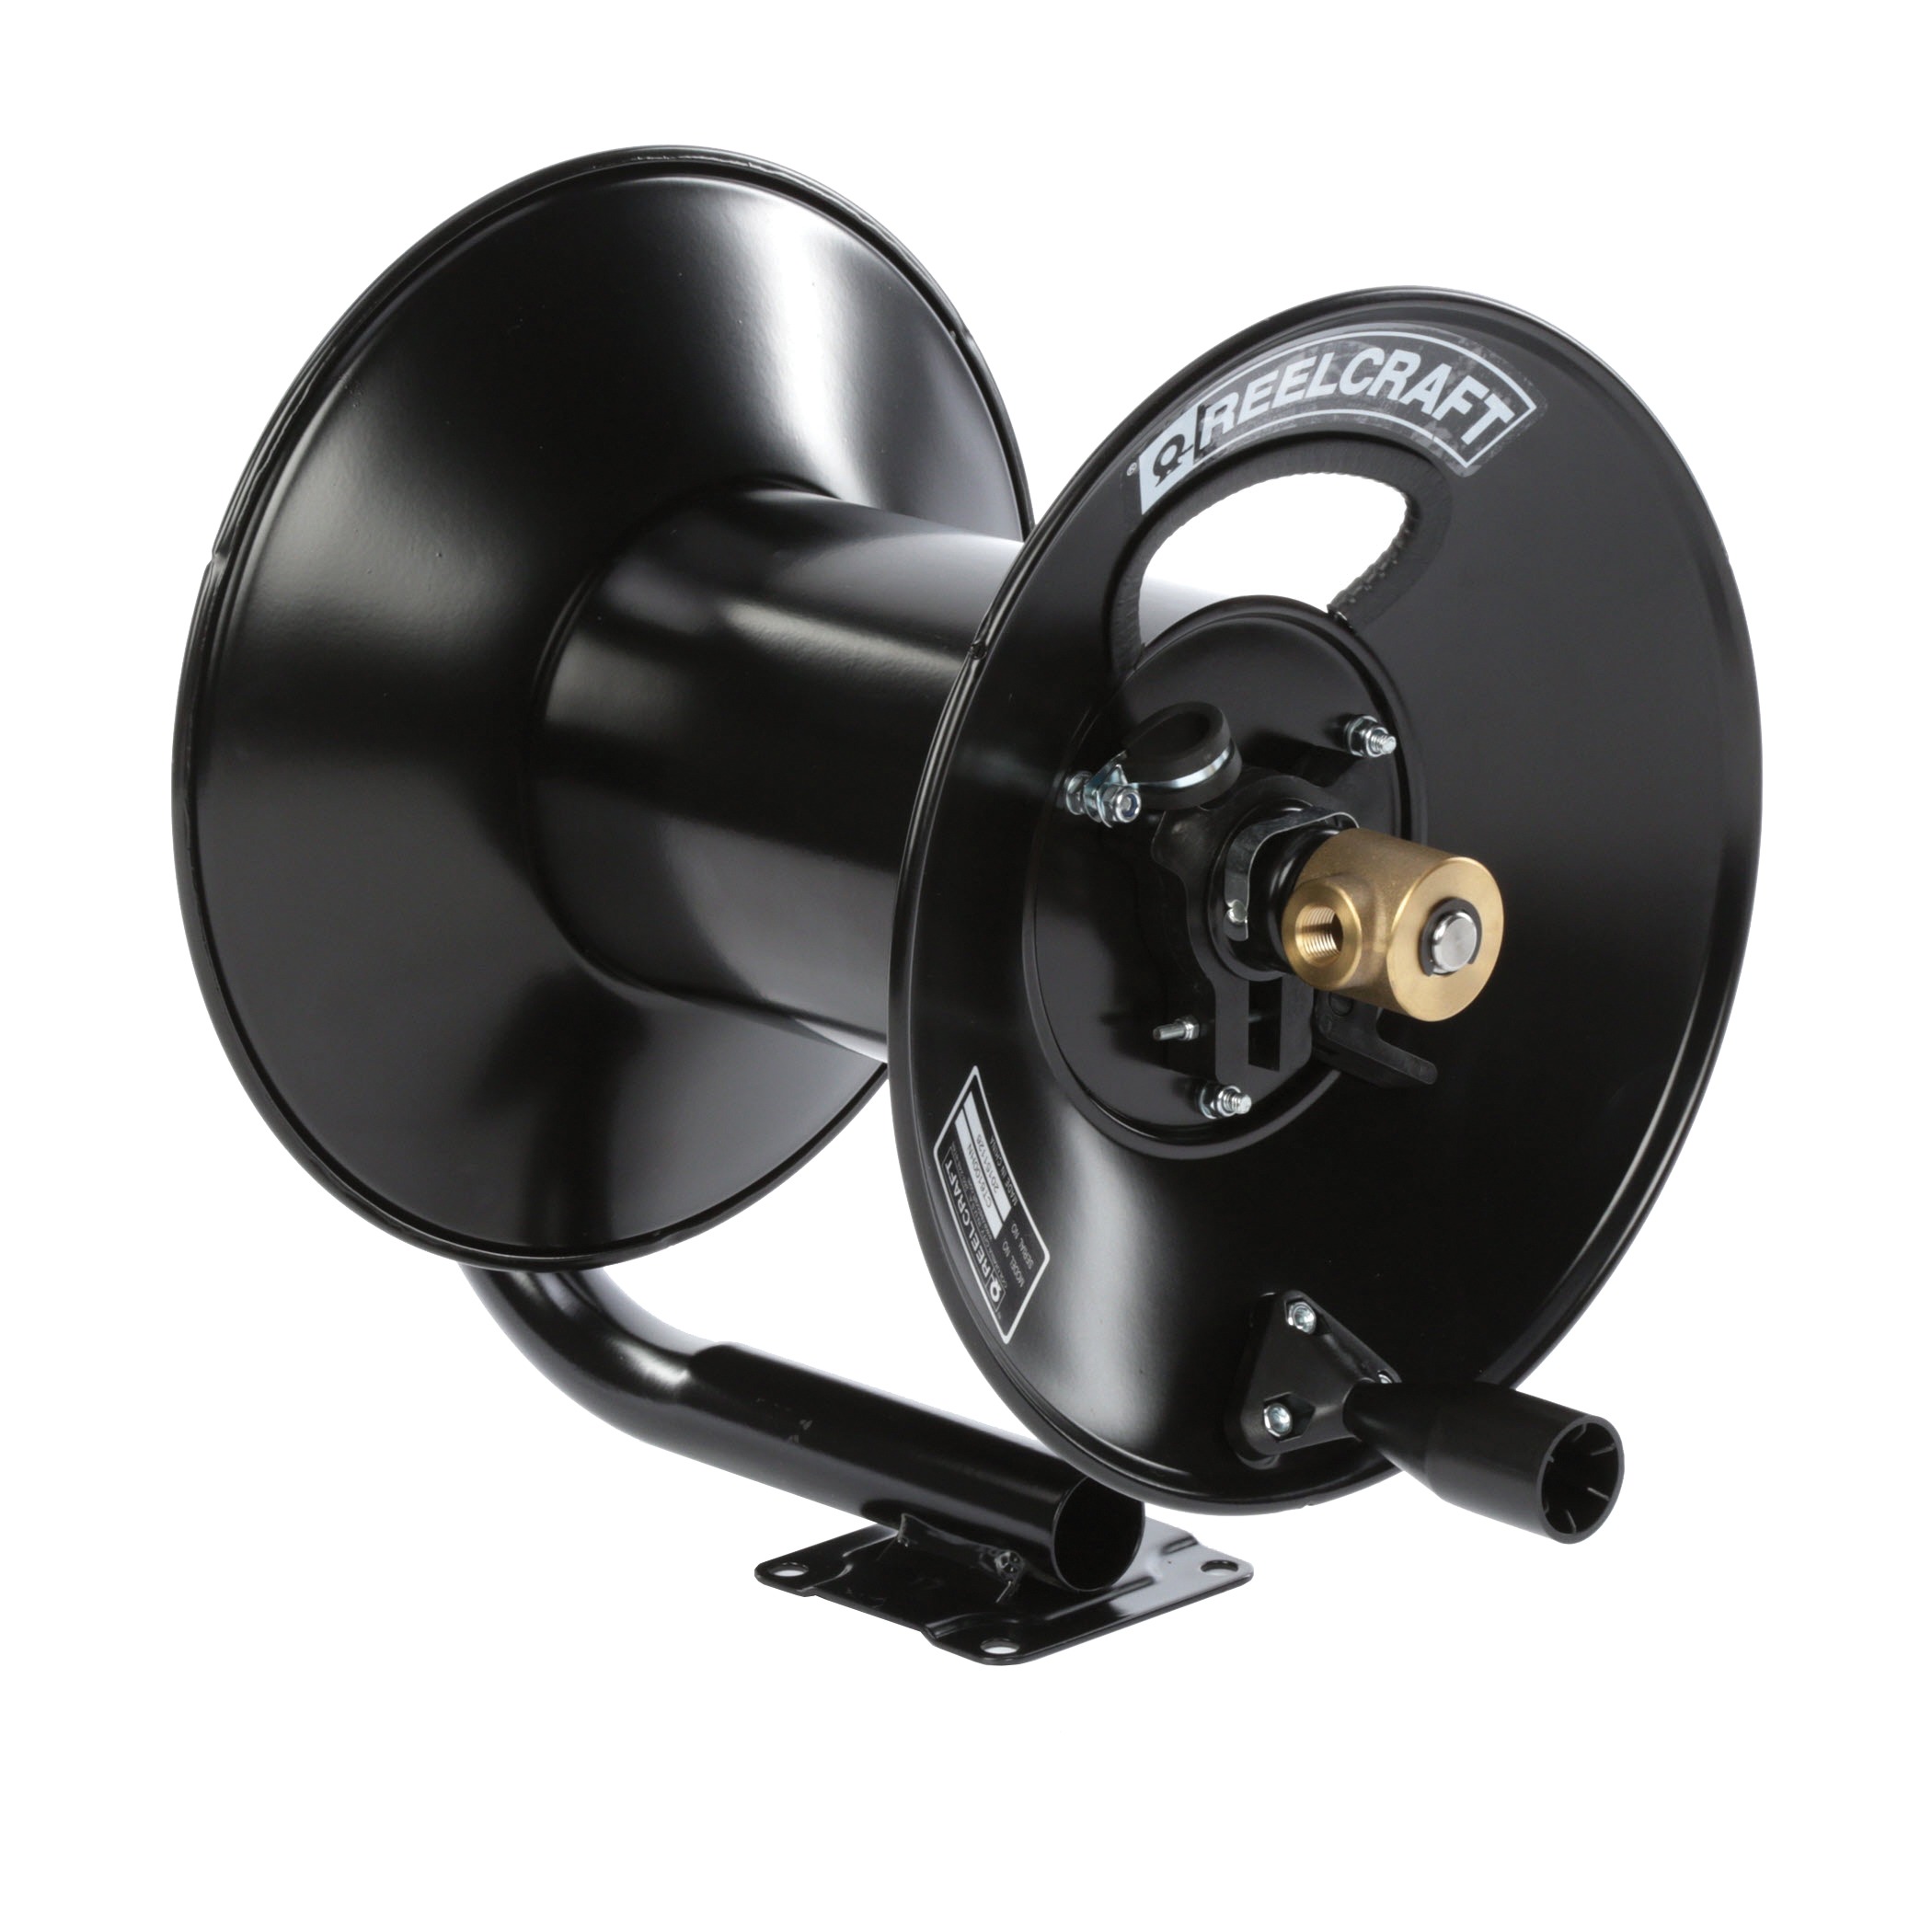 Reelcraft CT6050LN - 3/8 in. x 50 ft. Light Duty Hand Crank Hose Reel